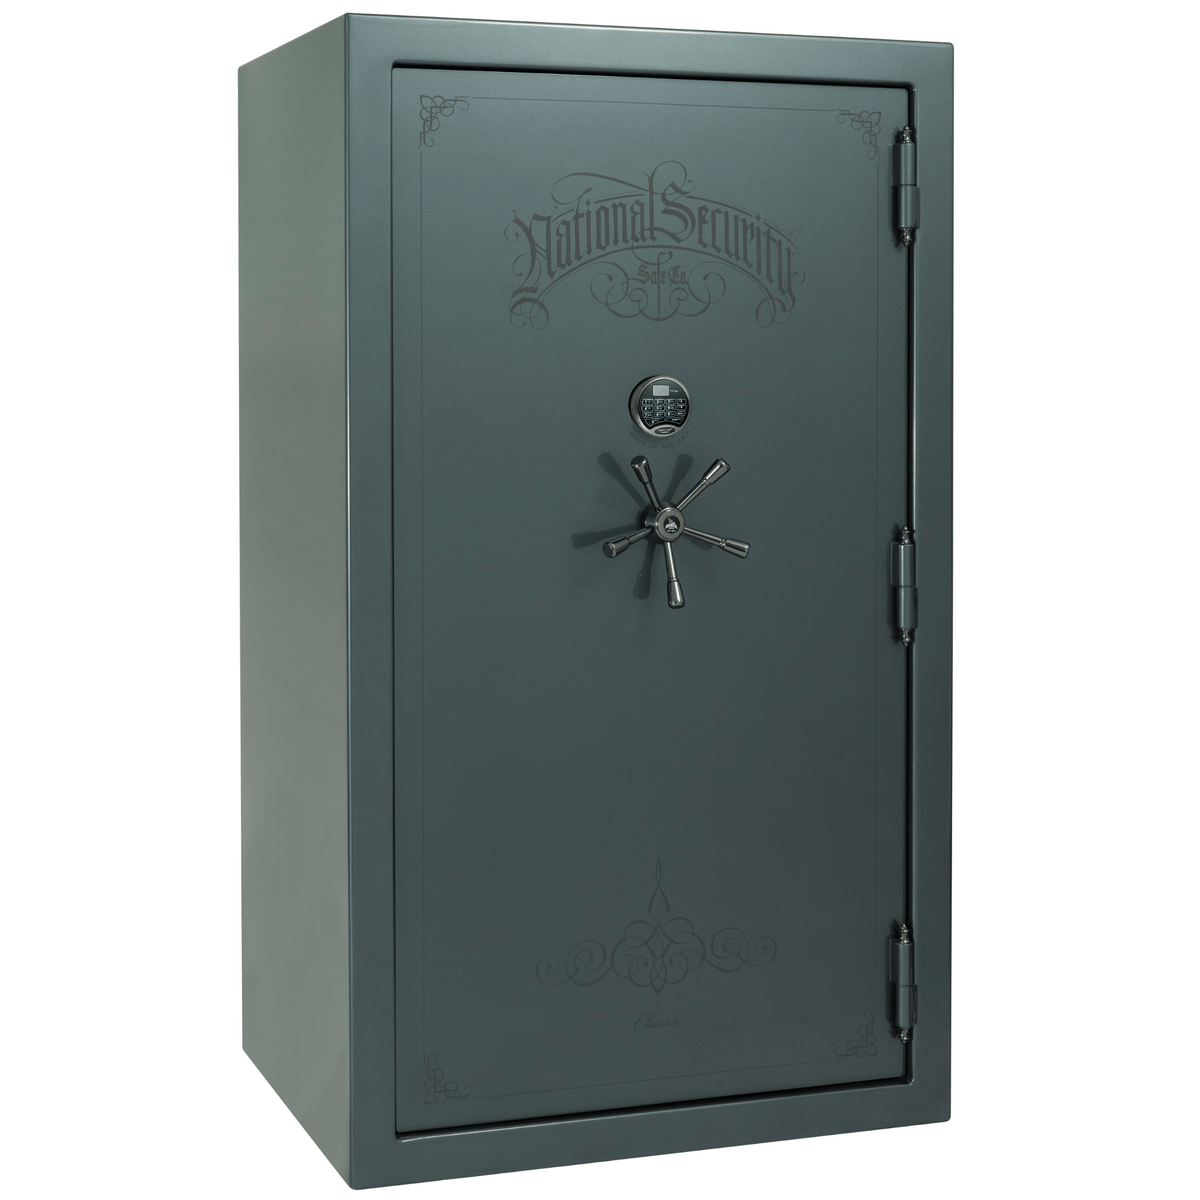 Liberty Safe Classic Plus 50 in Forest Mist Gloss with Black Chrome Electronic Lock, closed door.